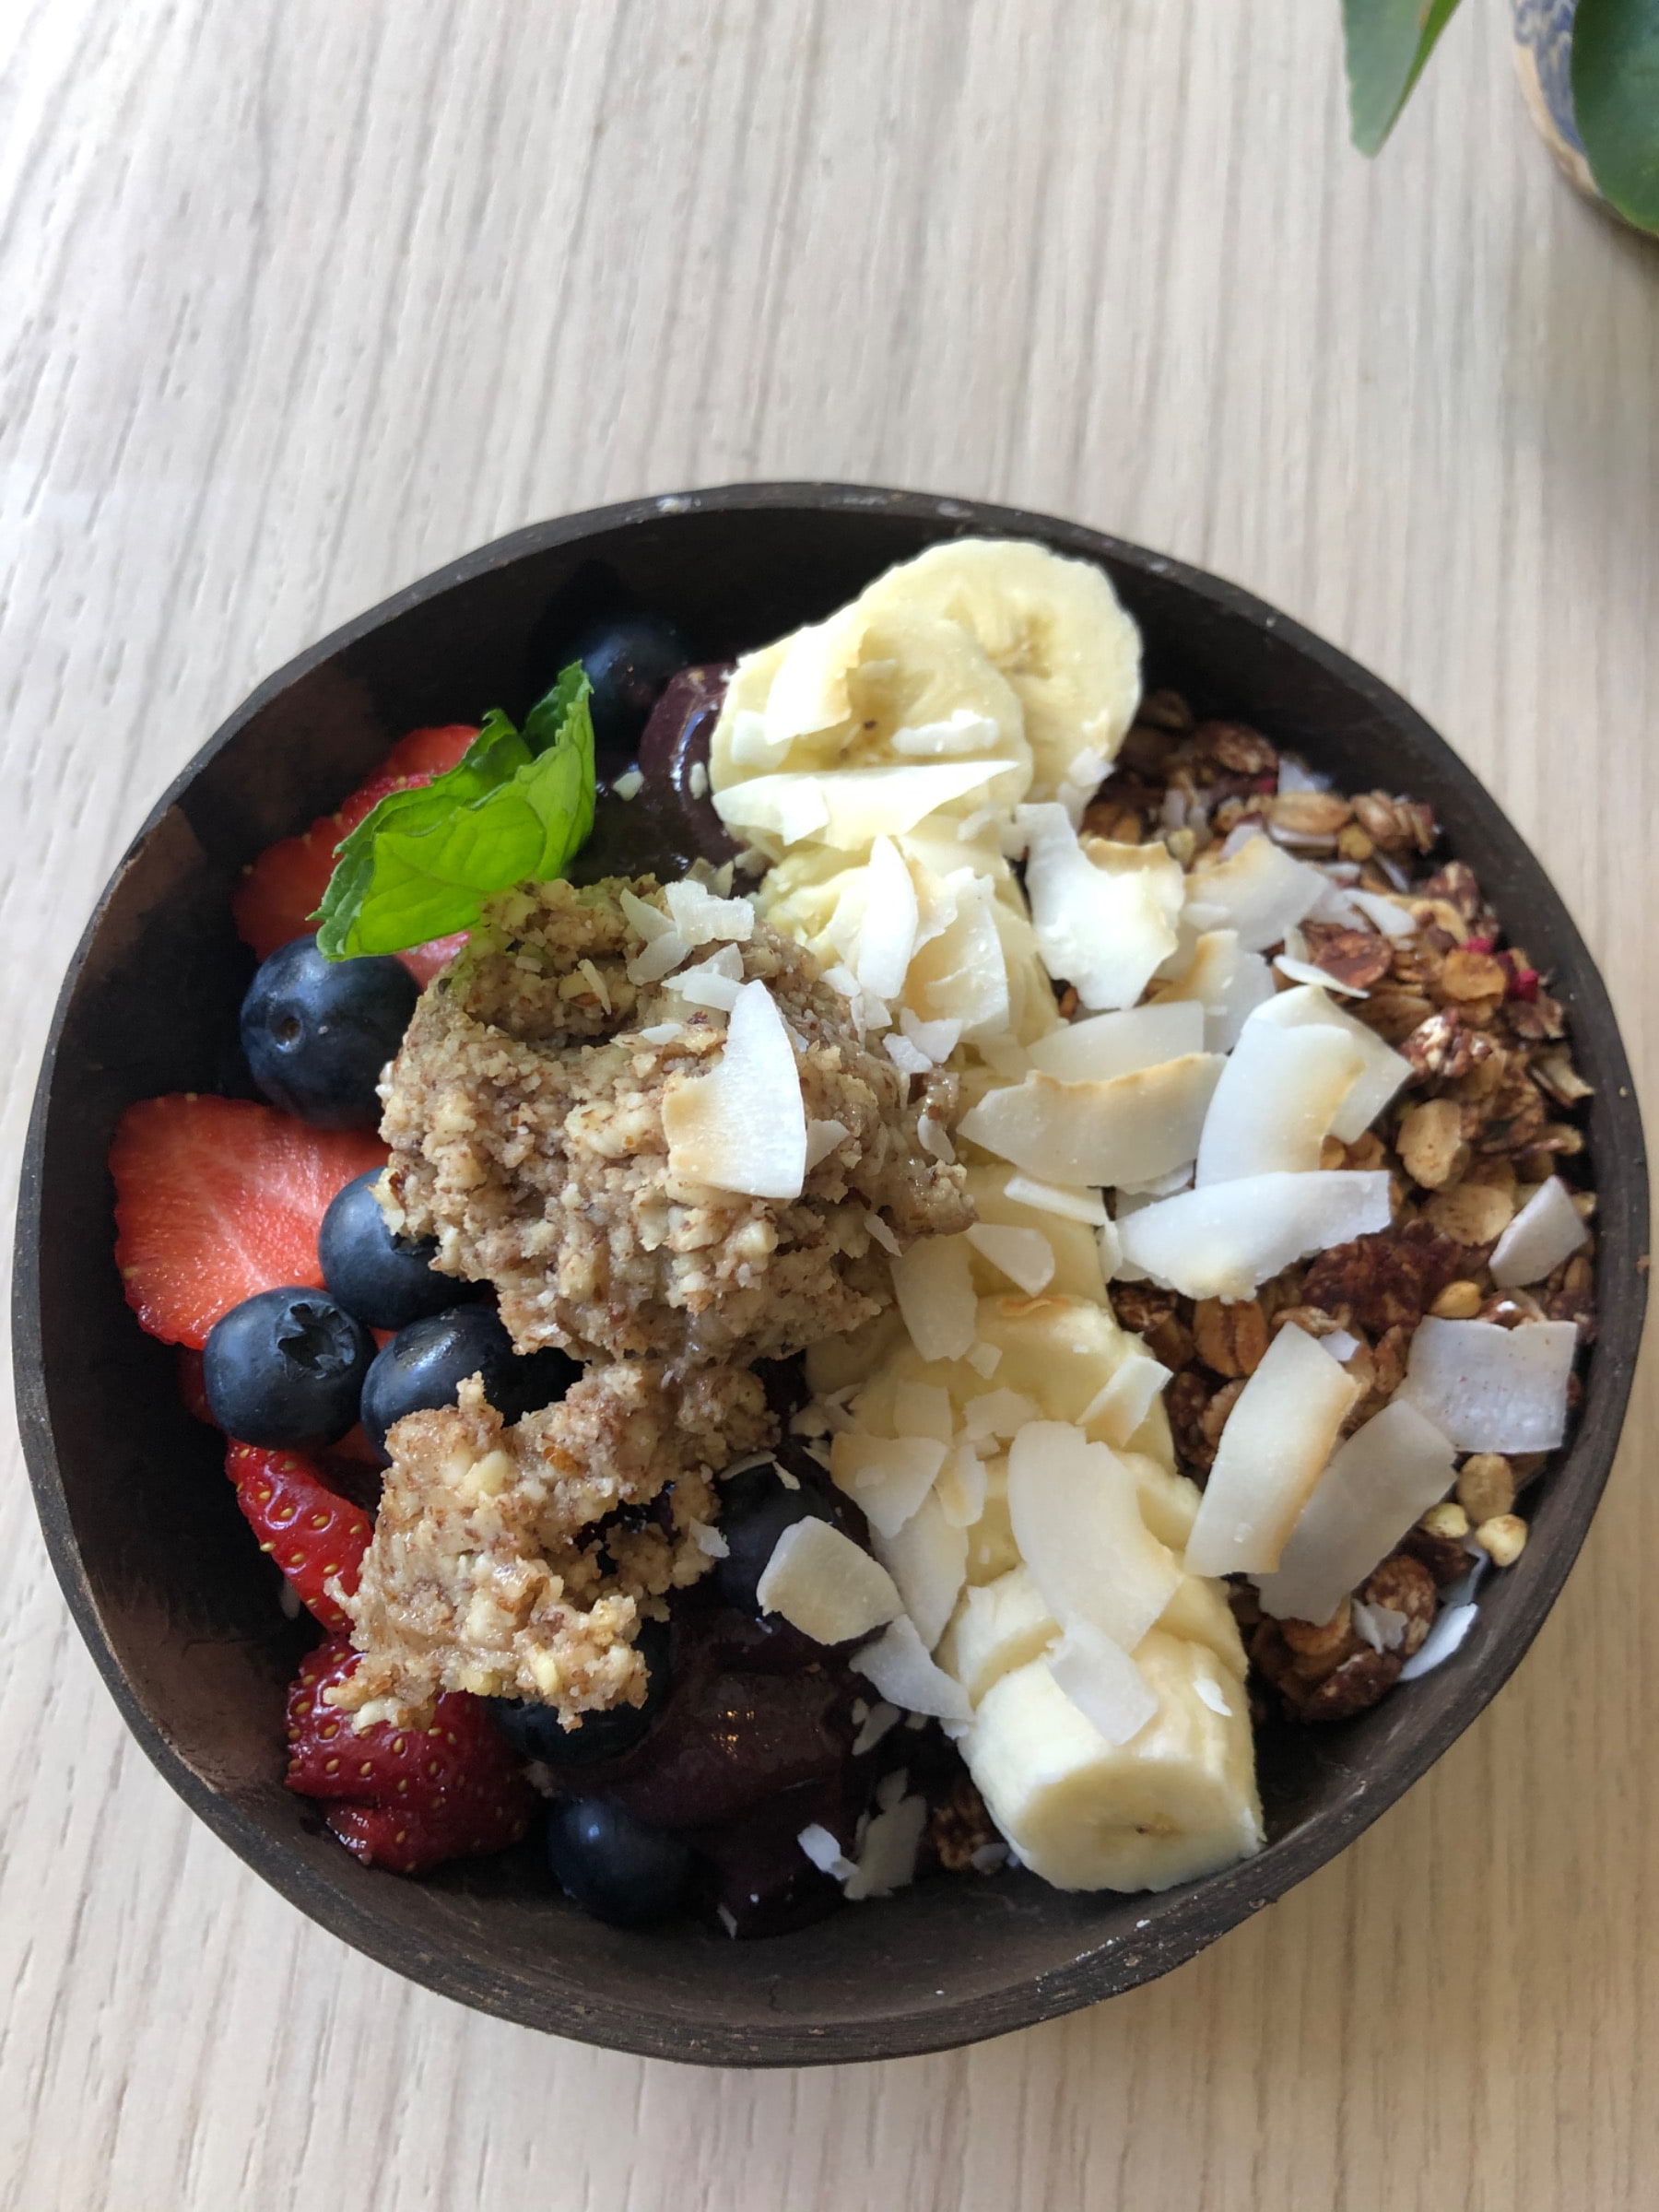 Acaibowl med mandelsmör  – Photo from Manucca Superfood by Josefin J. (11/05/2020)